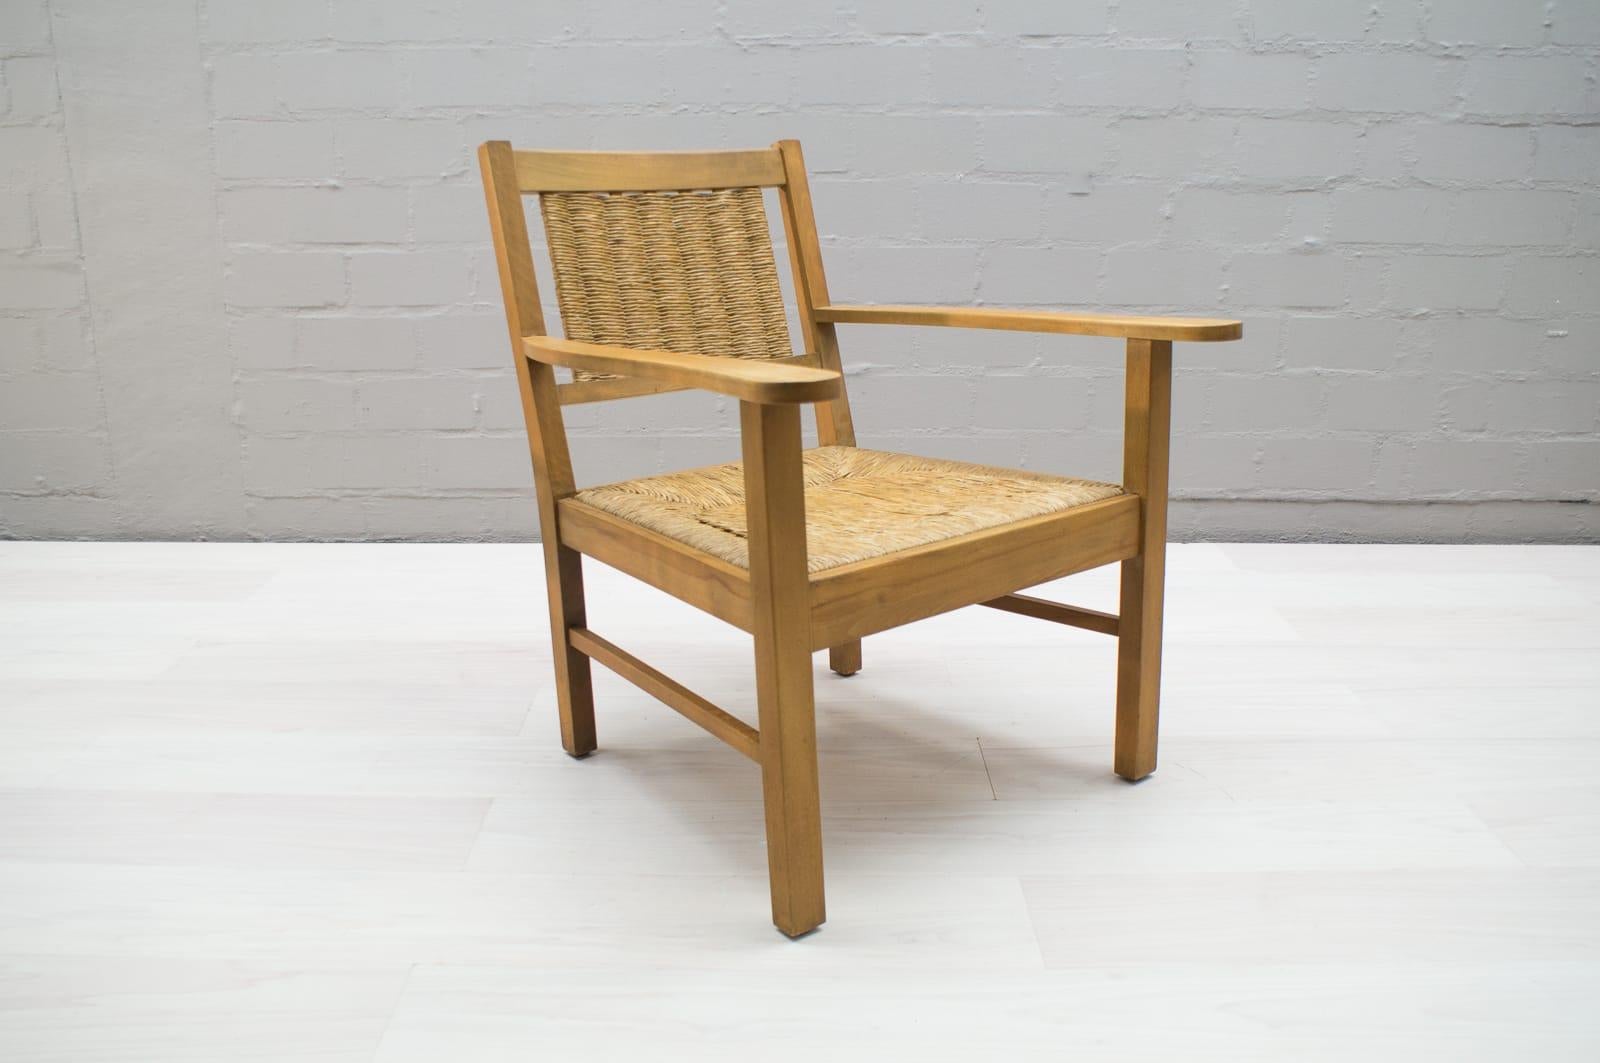 An exemplary example of Art Deco Modernist armchairs in the style of the French designer Francis Jourdain. The simple, straightforward composition is comprised of a stained beech frame with a slanted back and wicker upholstery as well. The wood